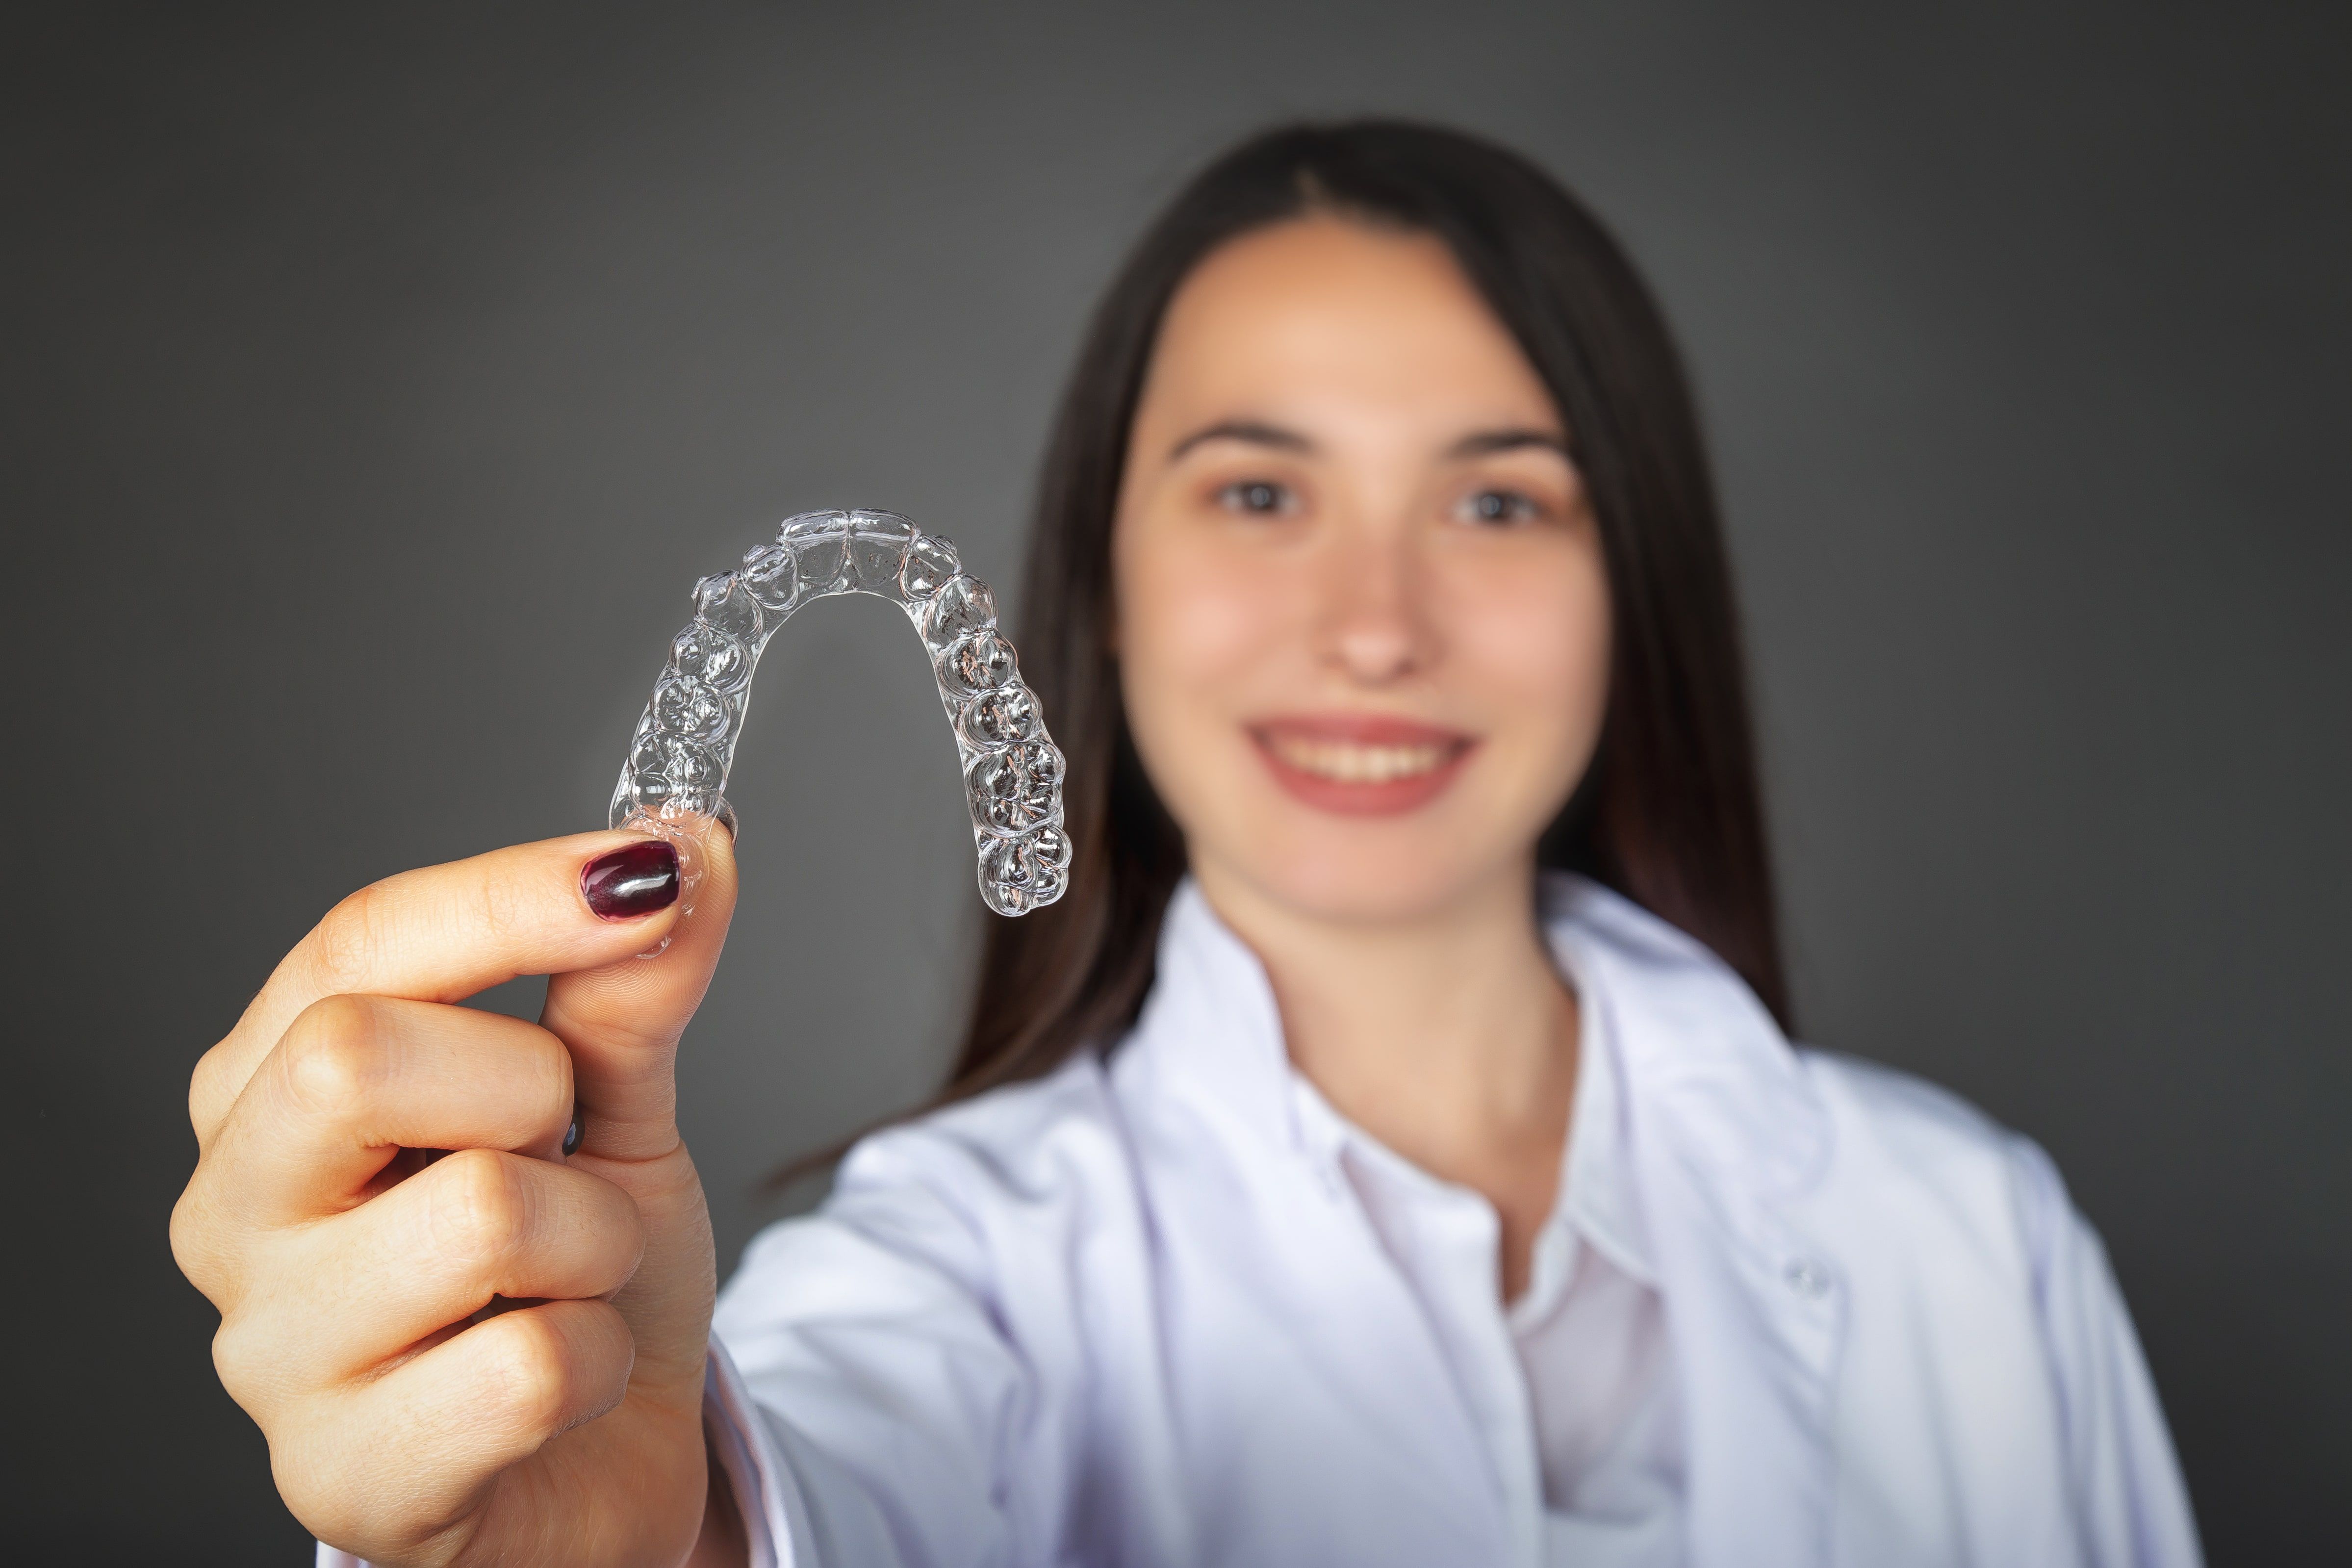 Young woman standing at a distance smiling and holding up an invisalign aligner